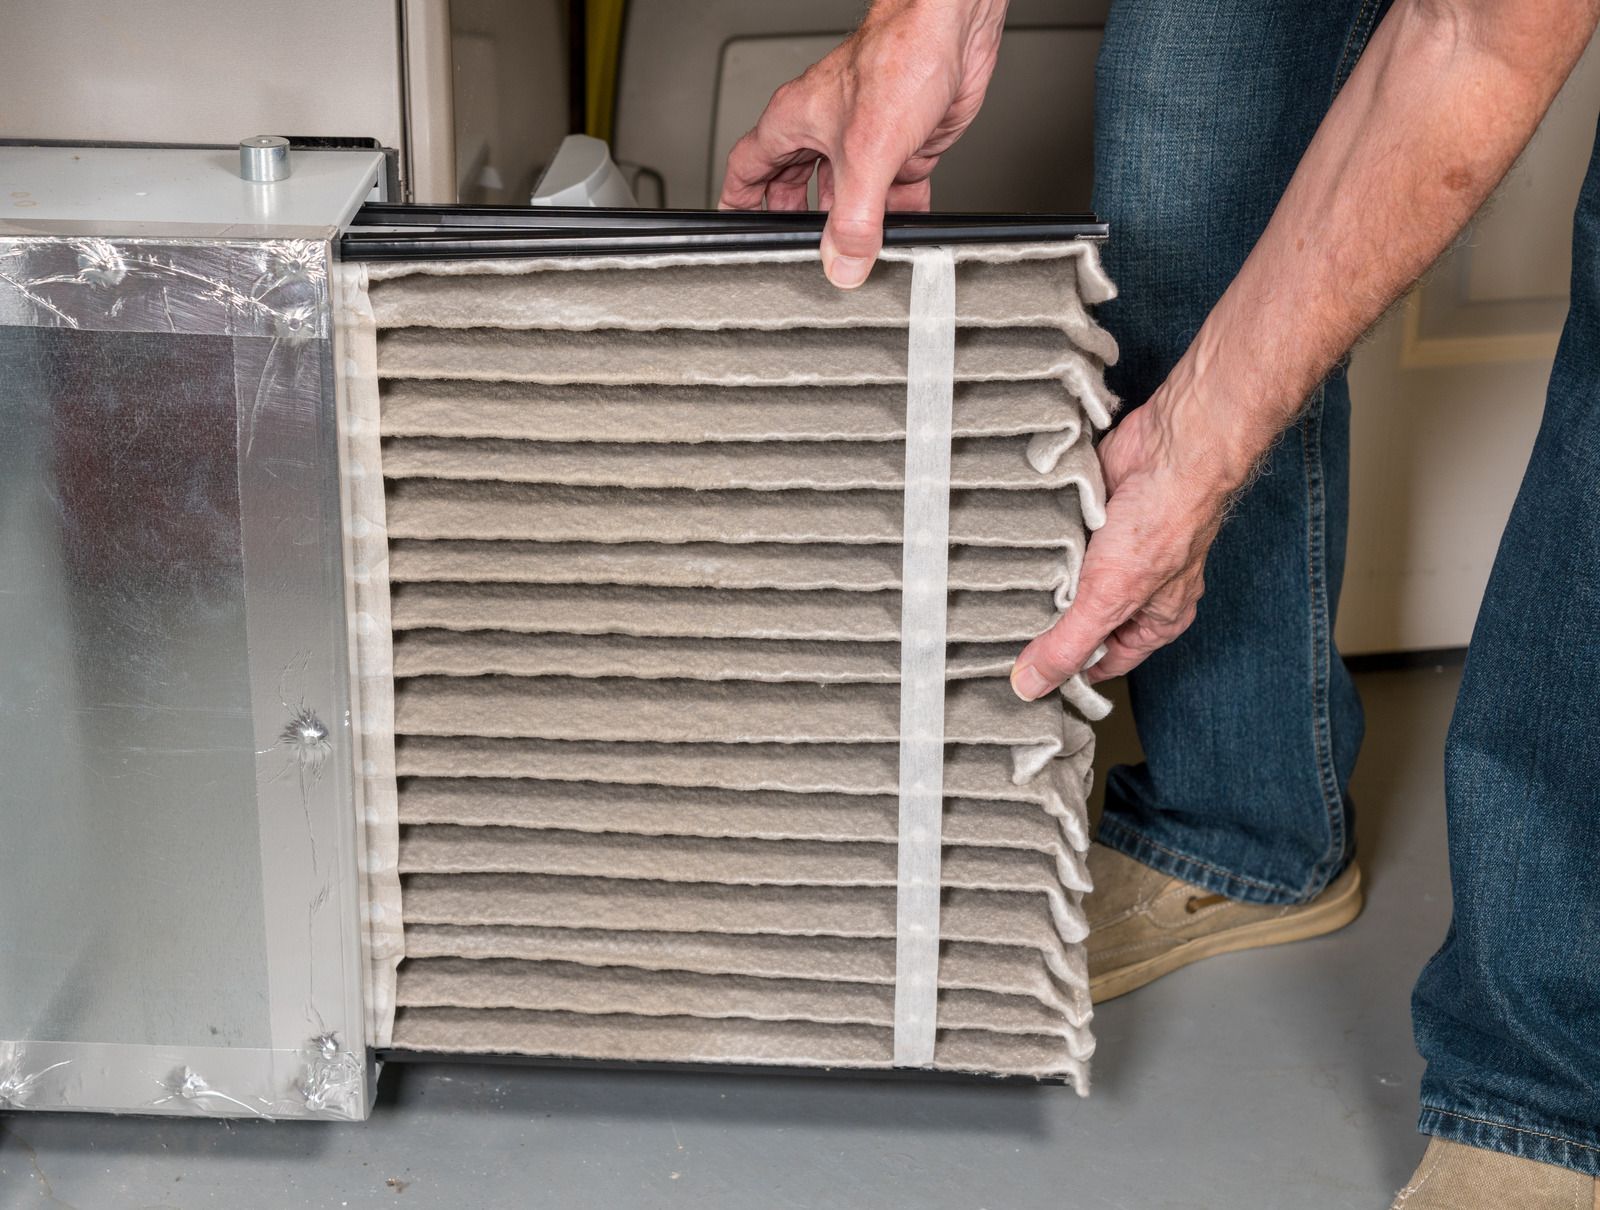 Picture of a dirty air filter being pulled out of a furnace.